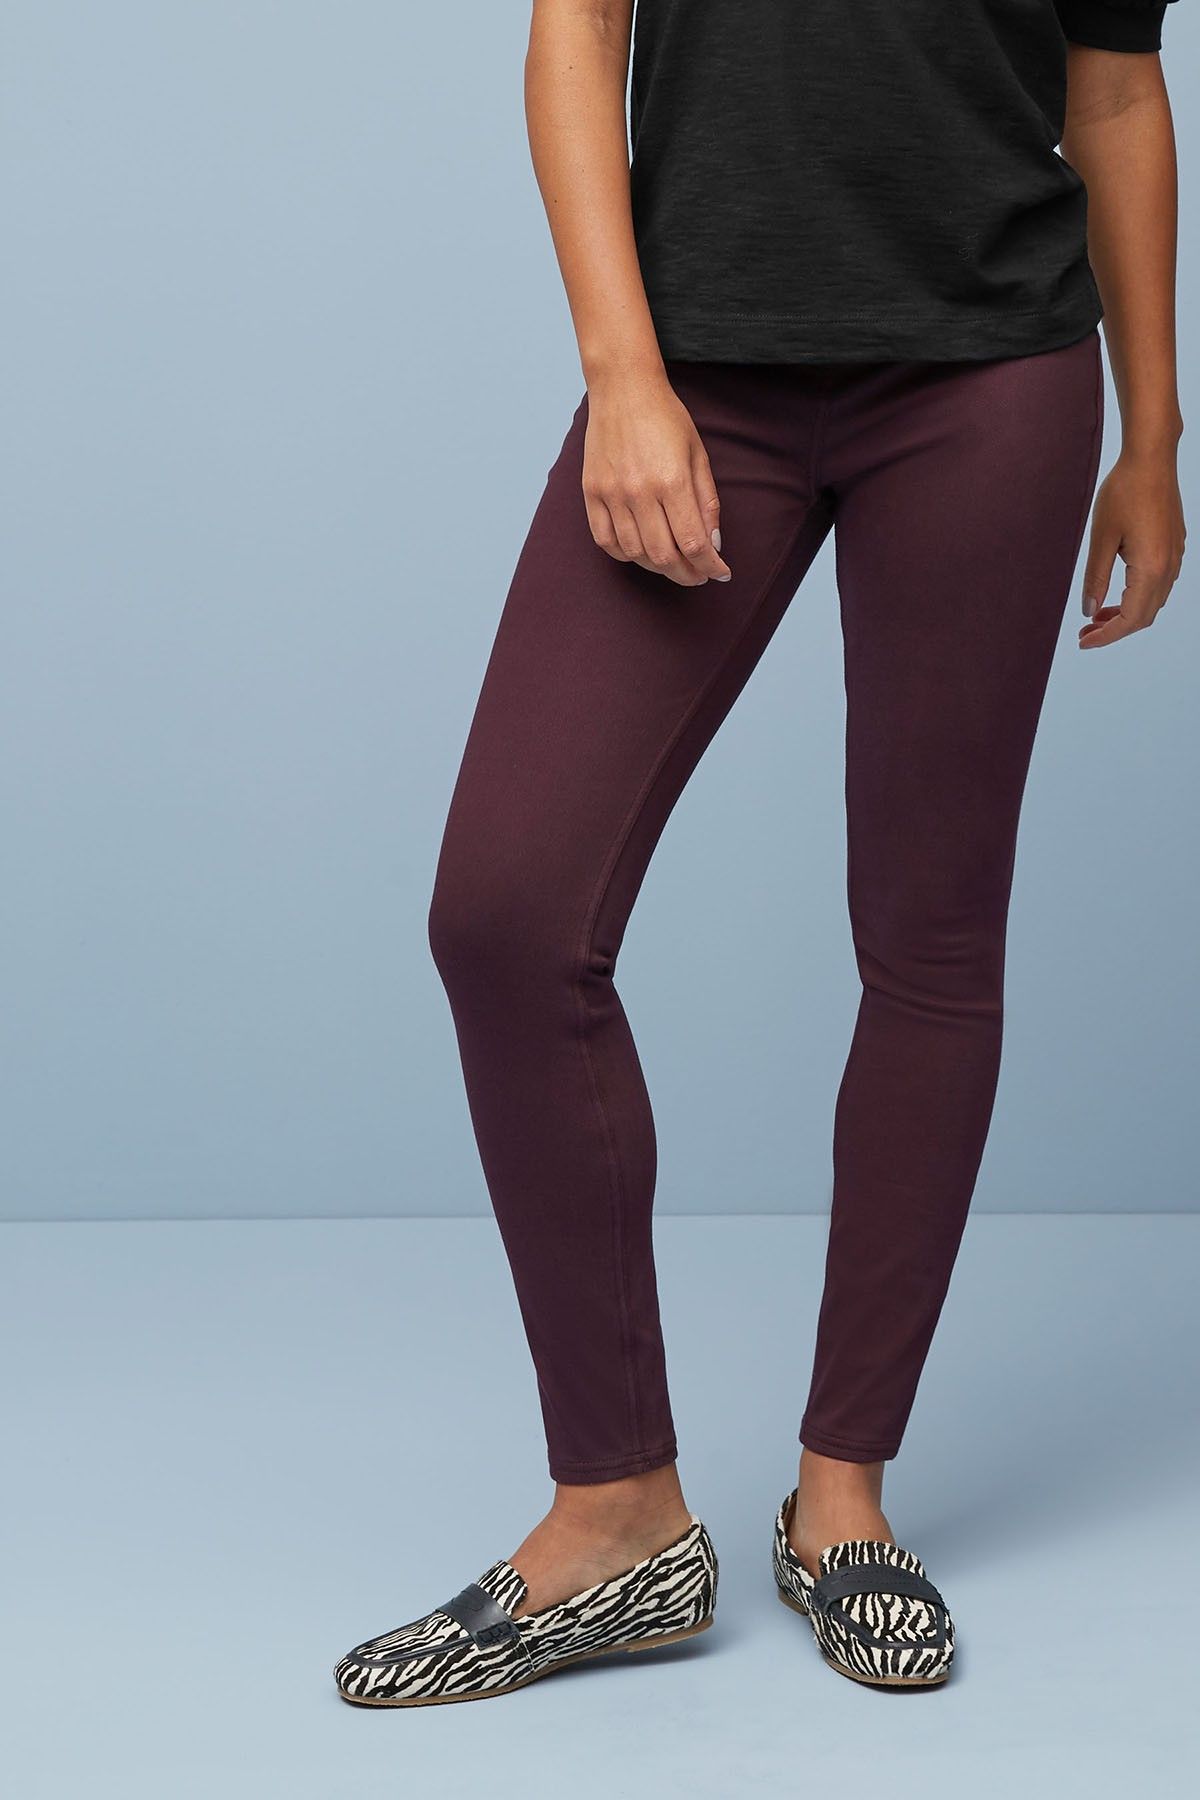 AE Next Level Low-Rise Flare Jean | Low rise flare jeans, Leggings are not  pants, Clothes